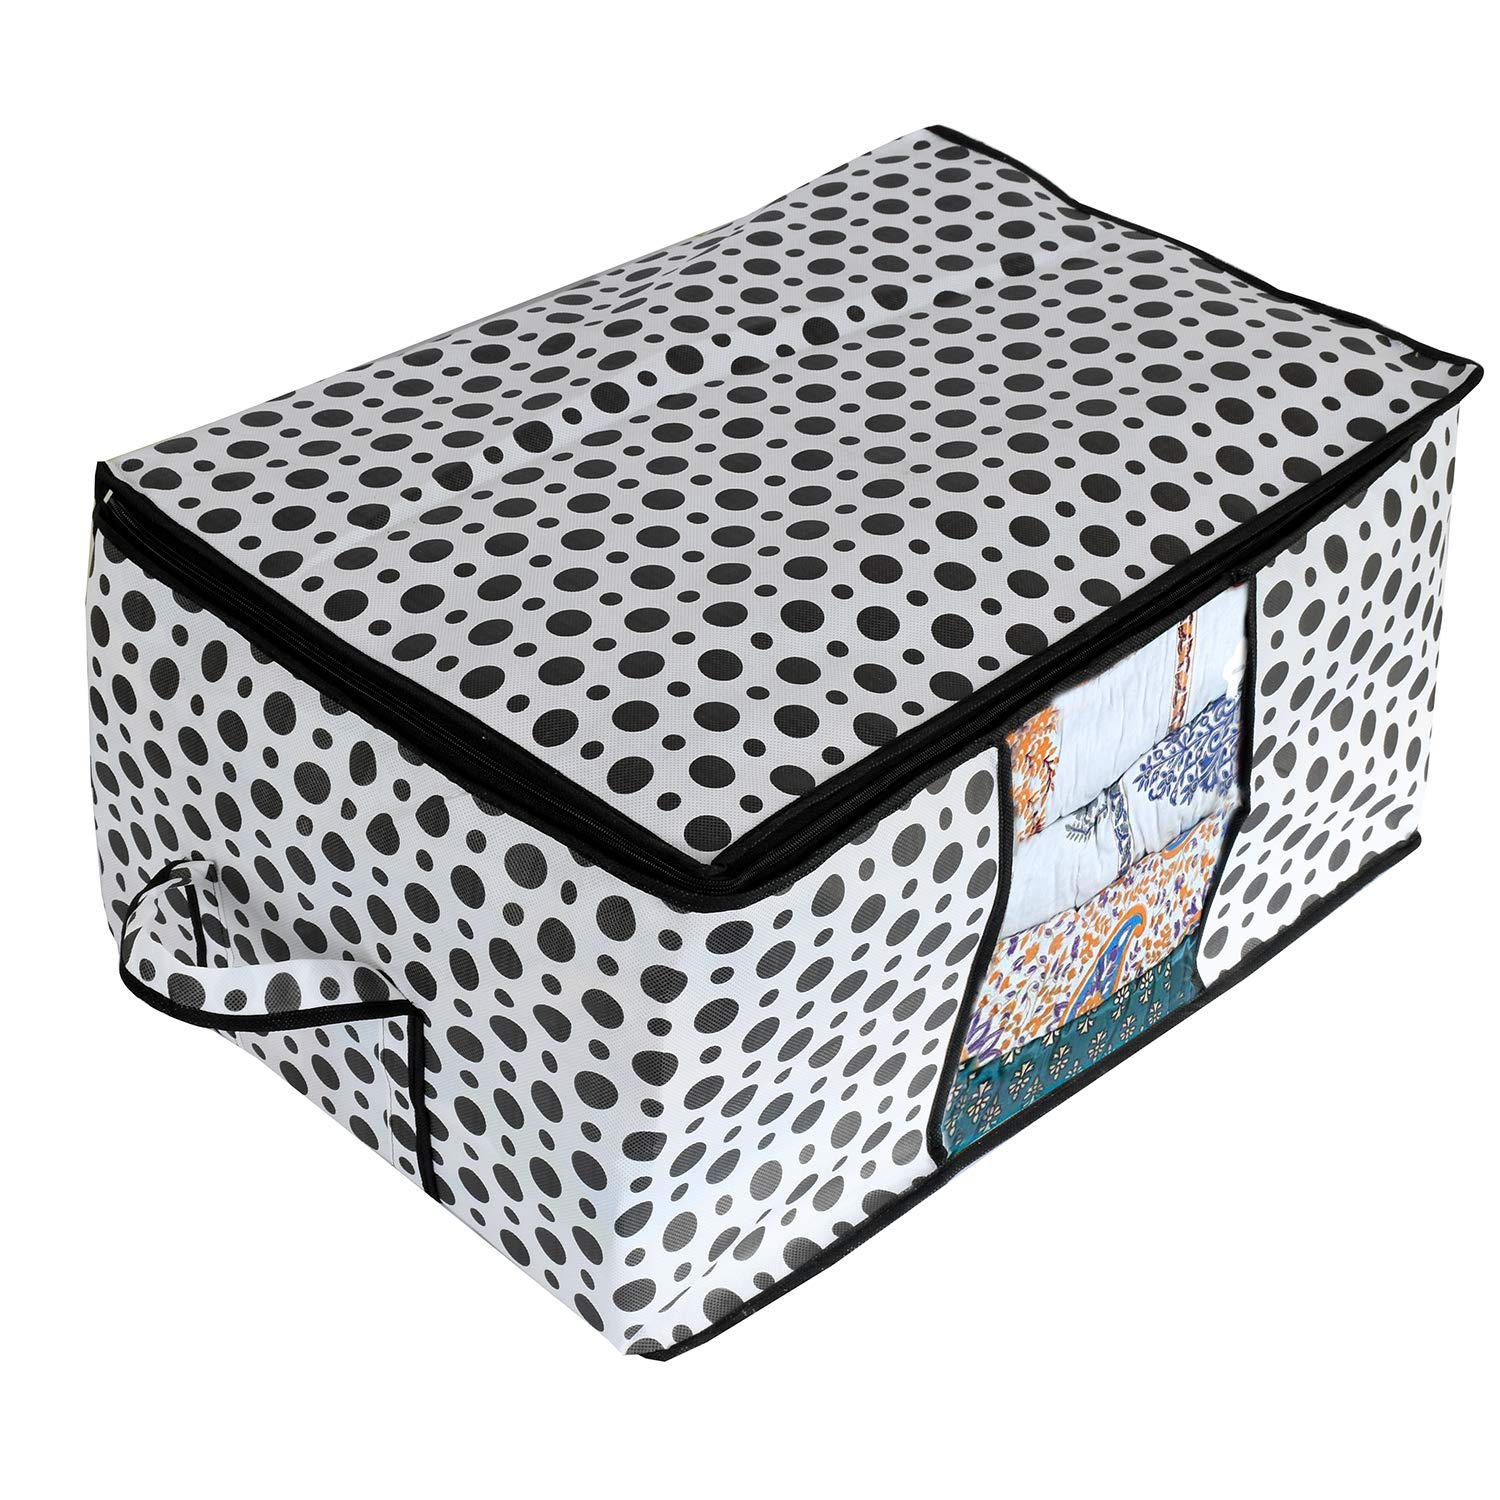 Kuber Industries Polka Dots Design Non Woven Underbed Storage Bag, Cloth Organiser, Blanket Cover with Transparent Window (Black and White) -CTKTC038108, Standard